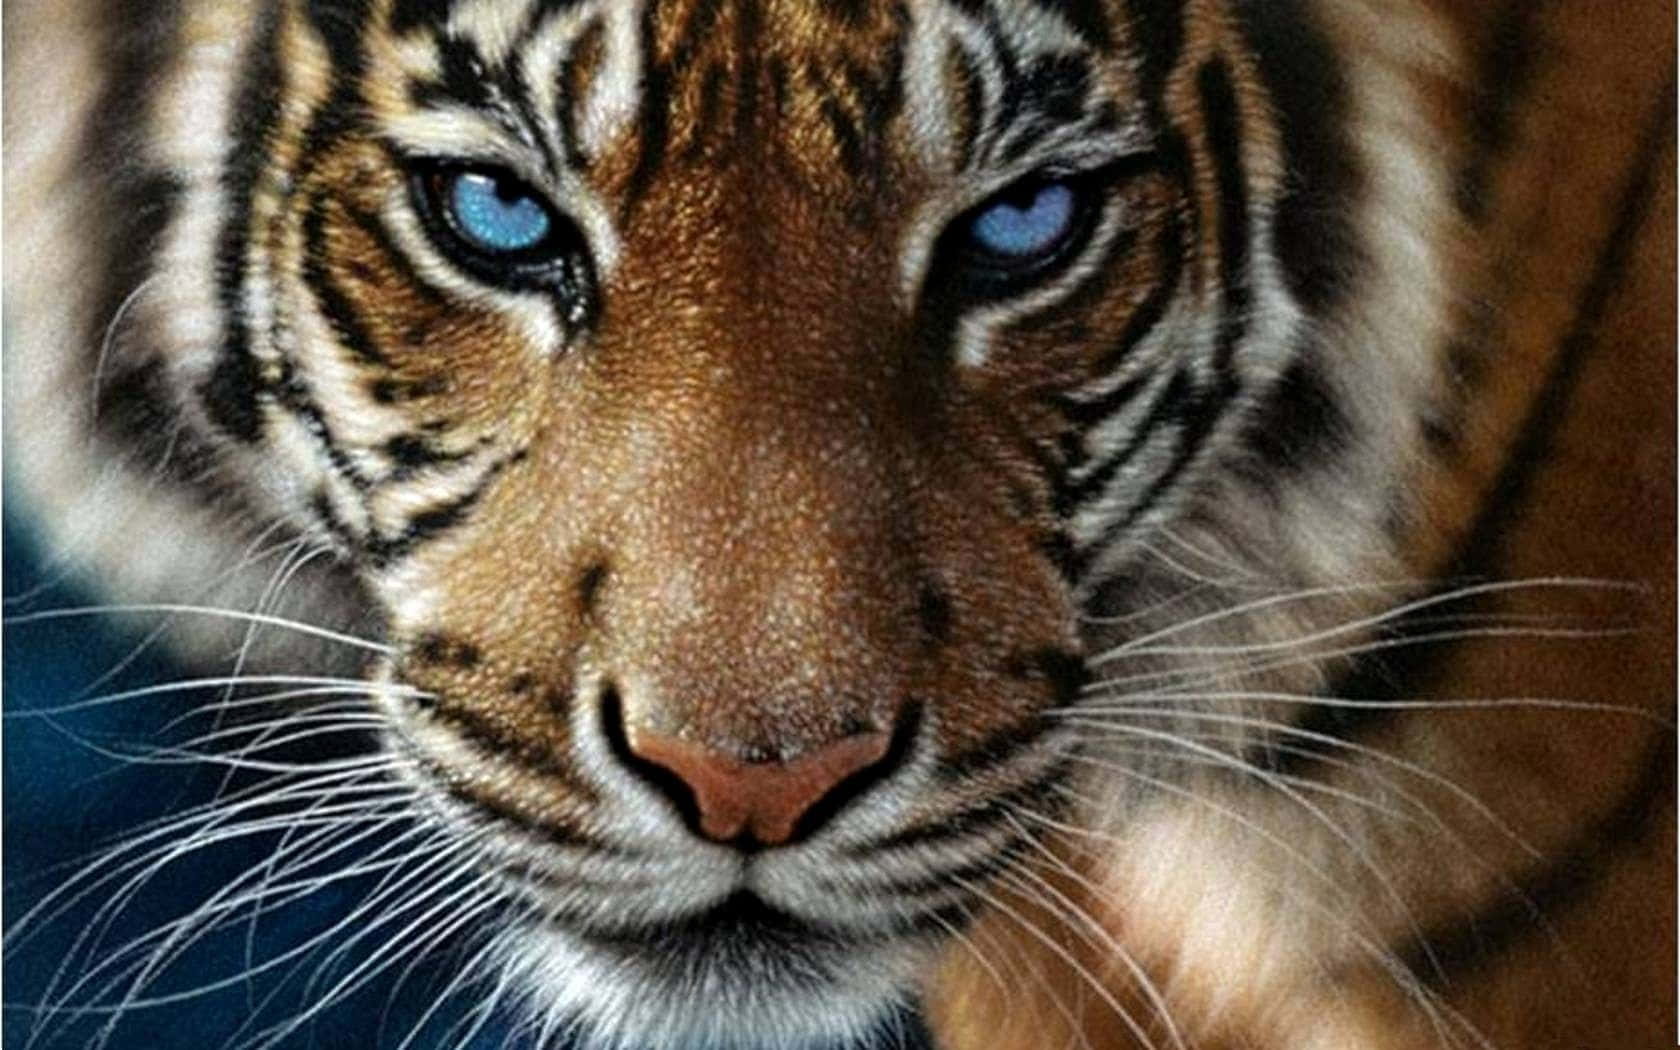 Tiger face HD wallpapers free download | Wallpaperbetter